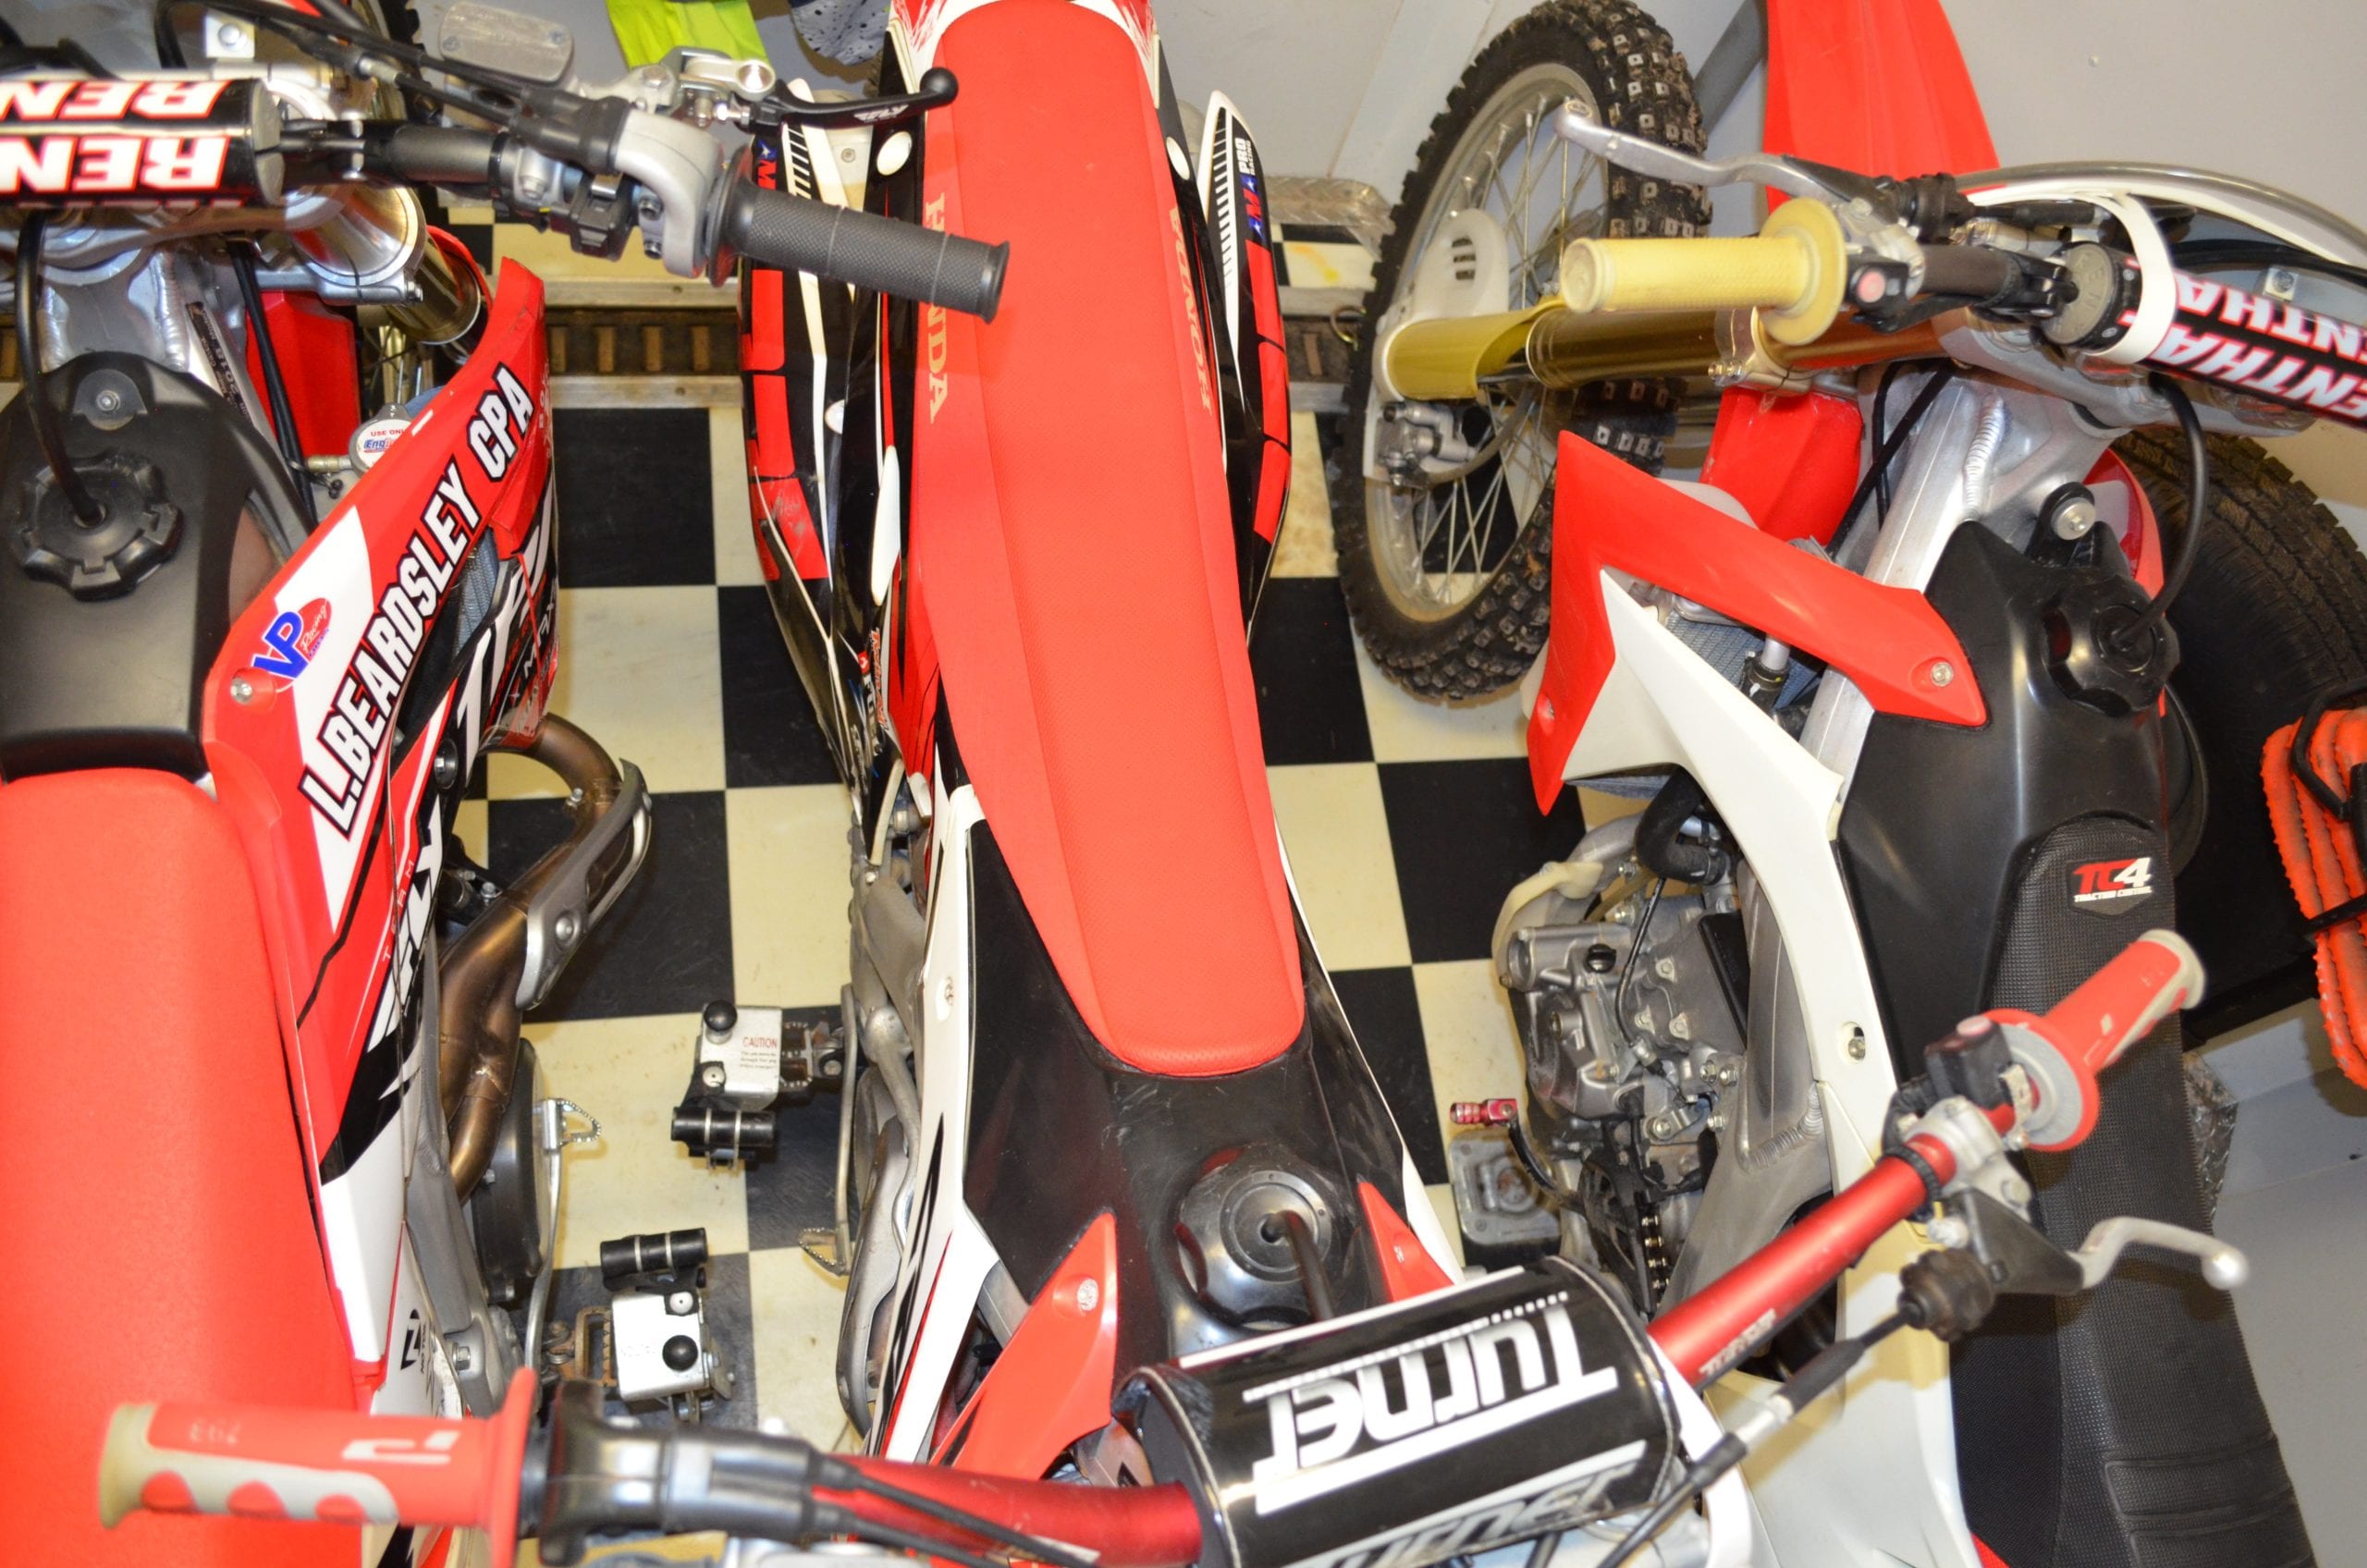 Overhead view of three bikes in small space